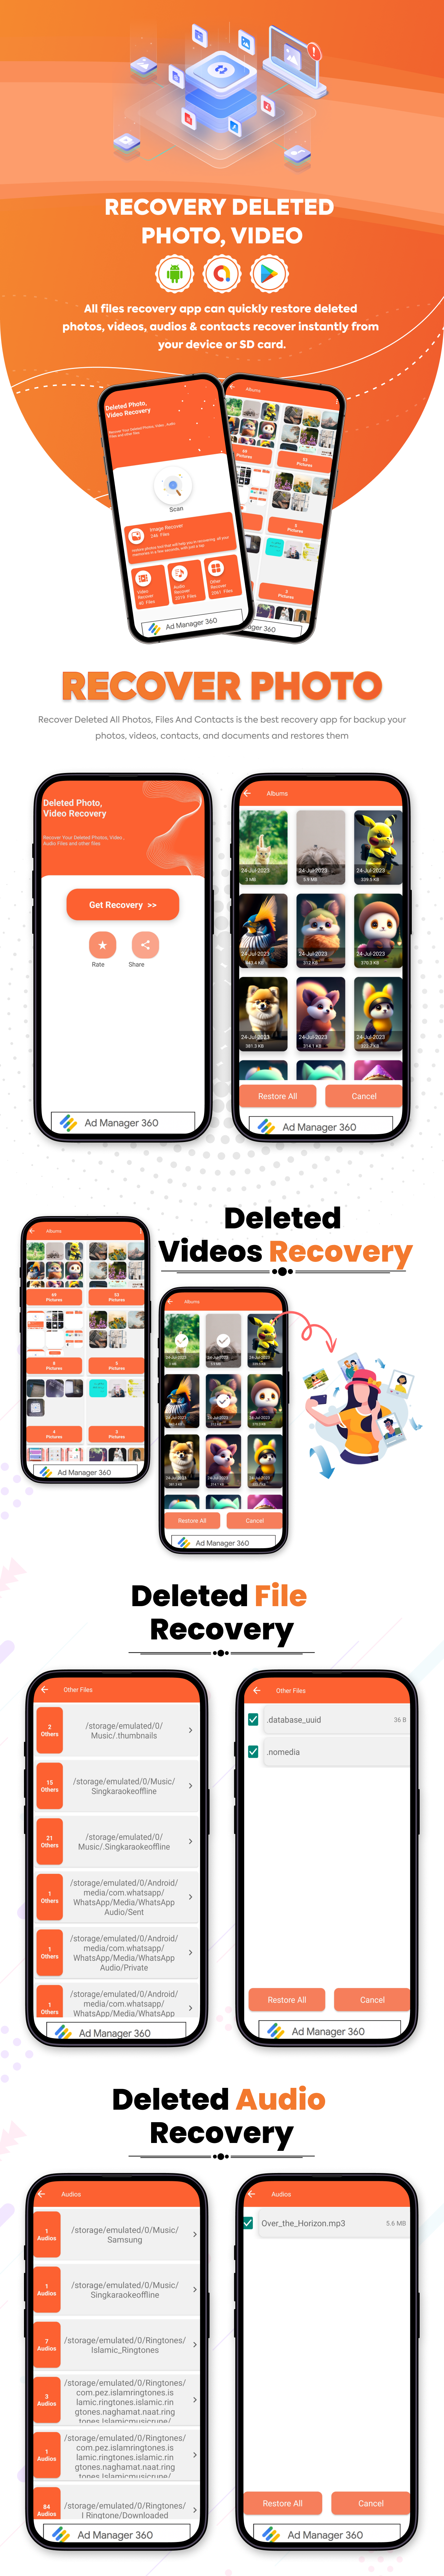 Recovery Deleted Photo,Videos - Restore All Deleted Files - Deleted Data Recovery Tool App - 1